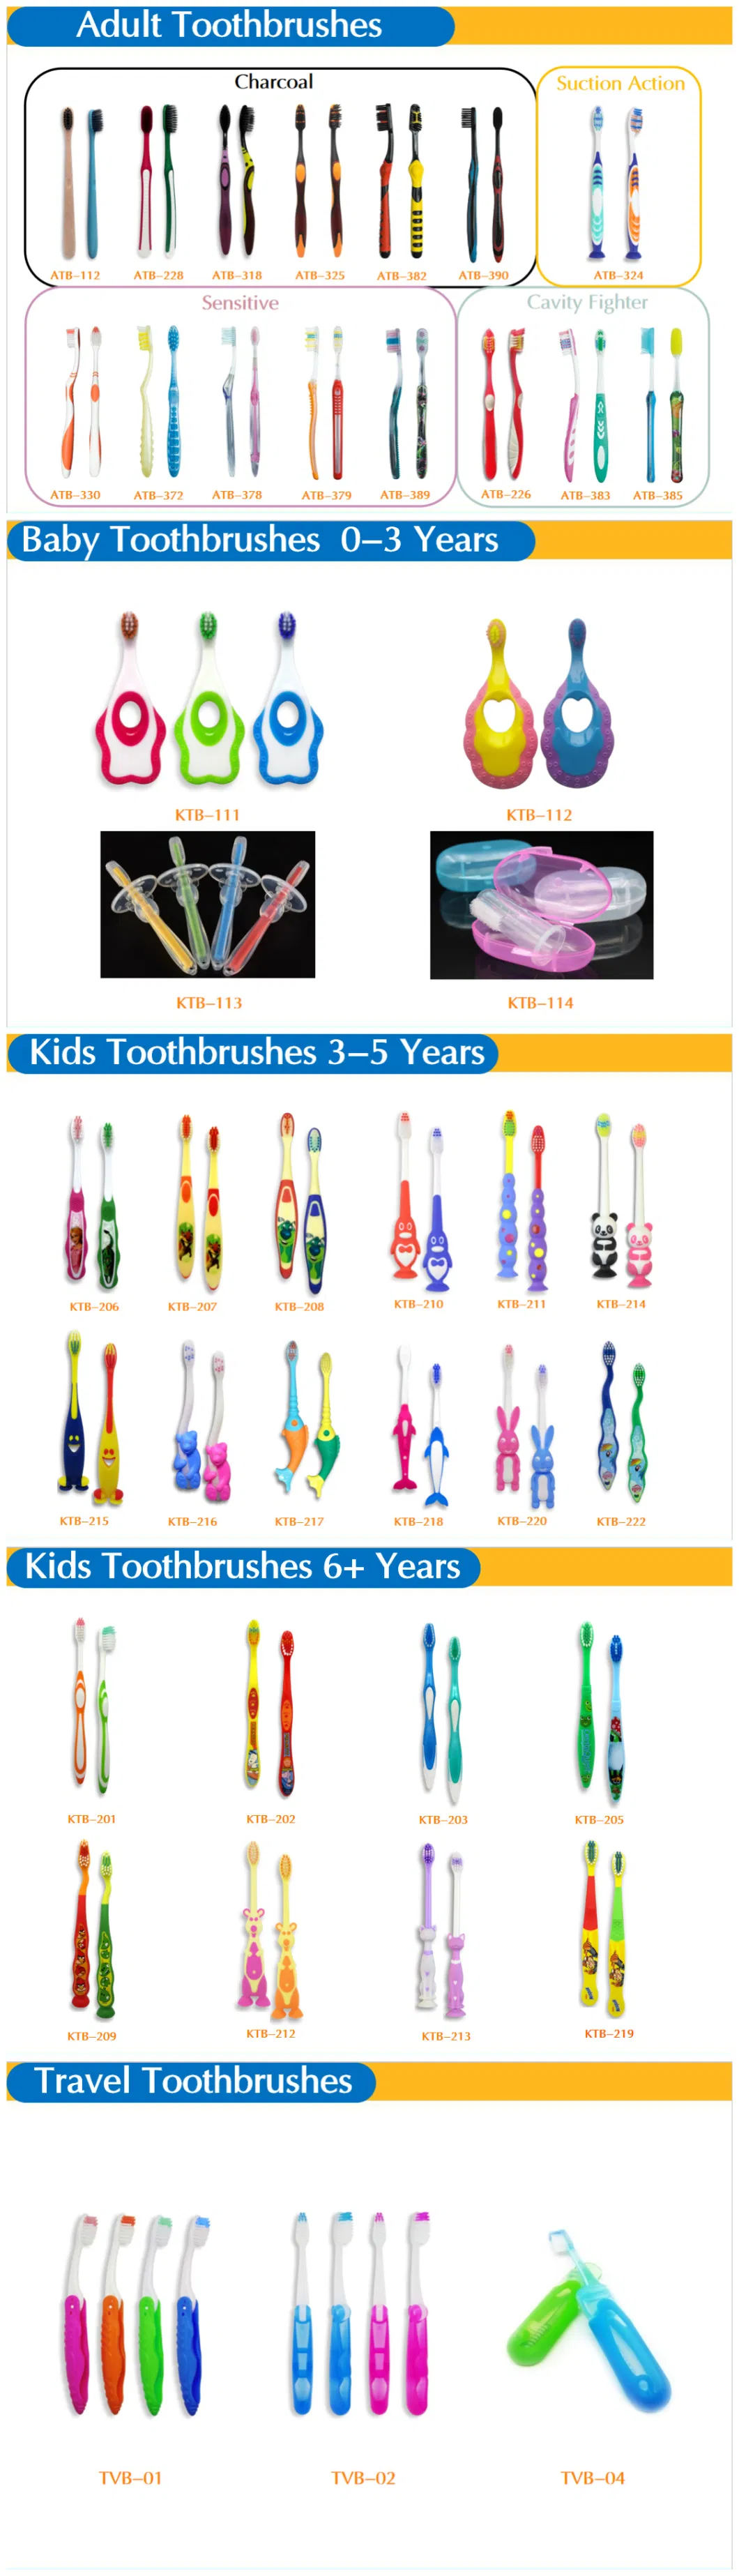 Atb-375-1 Customized Tripple Action Soft Grip Adult Toothbrush/Tooth Brush